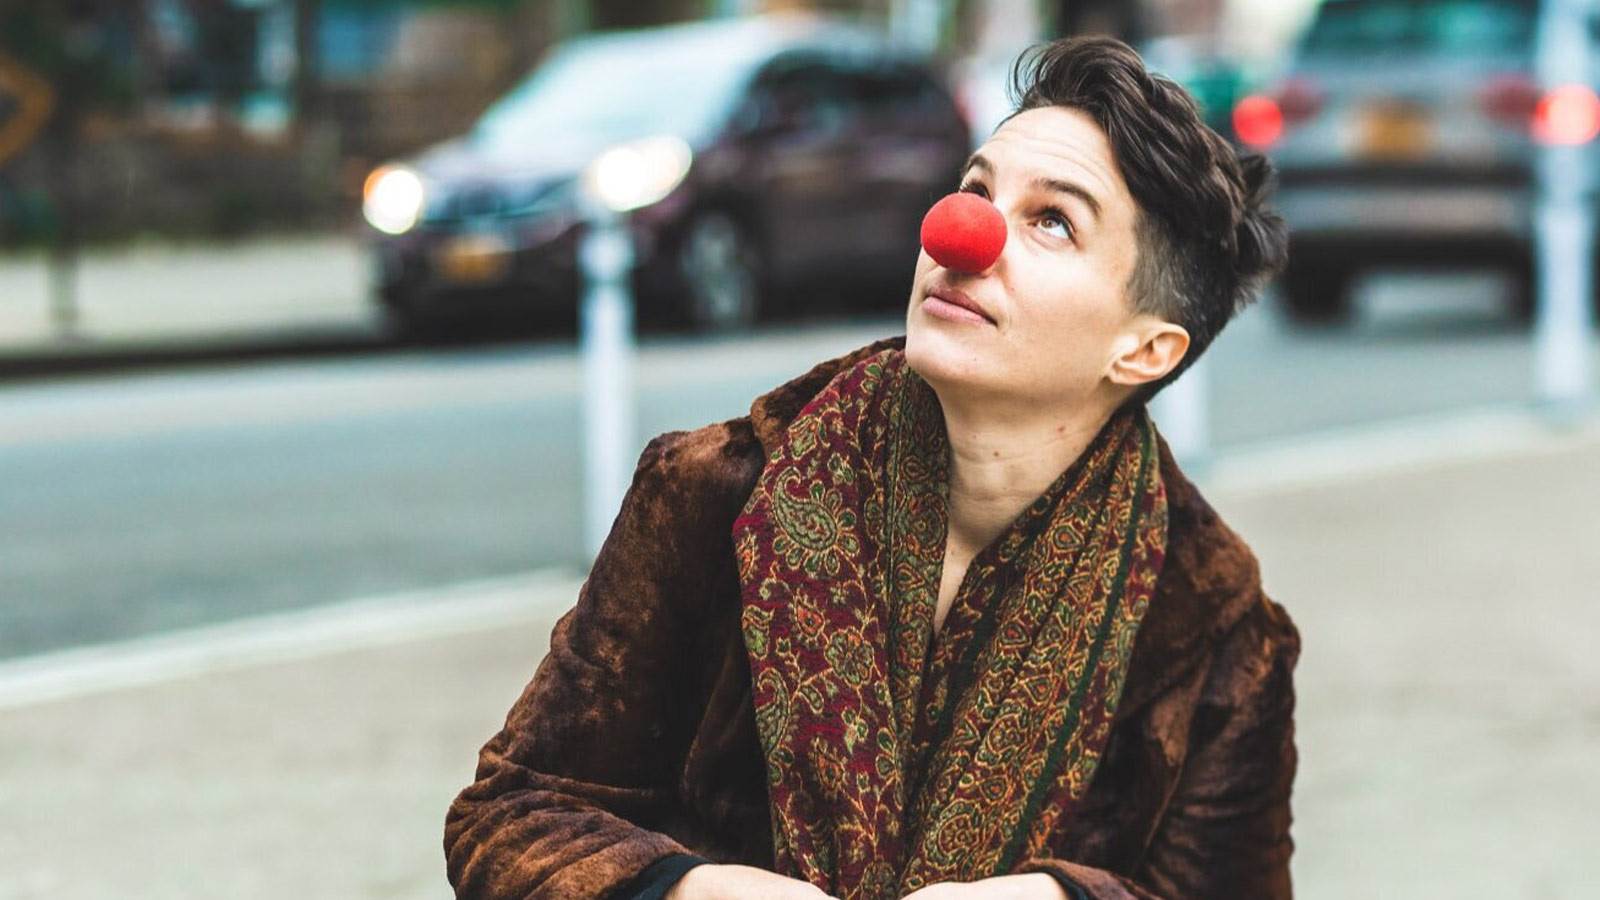 A person looking up at the sky, wearing a brown coat and a clown nose. They are near a city street.